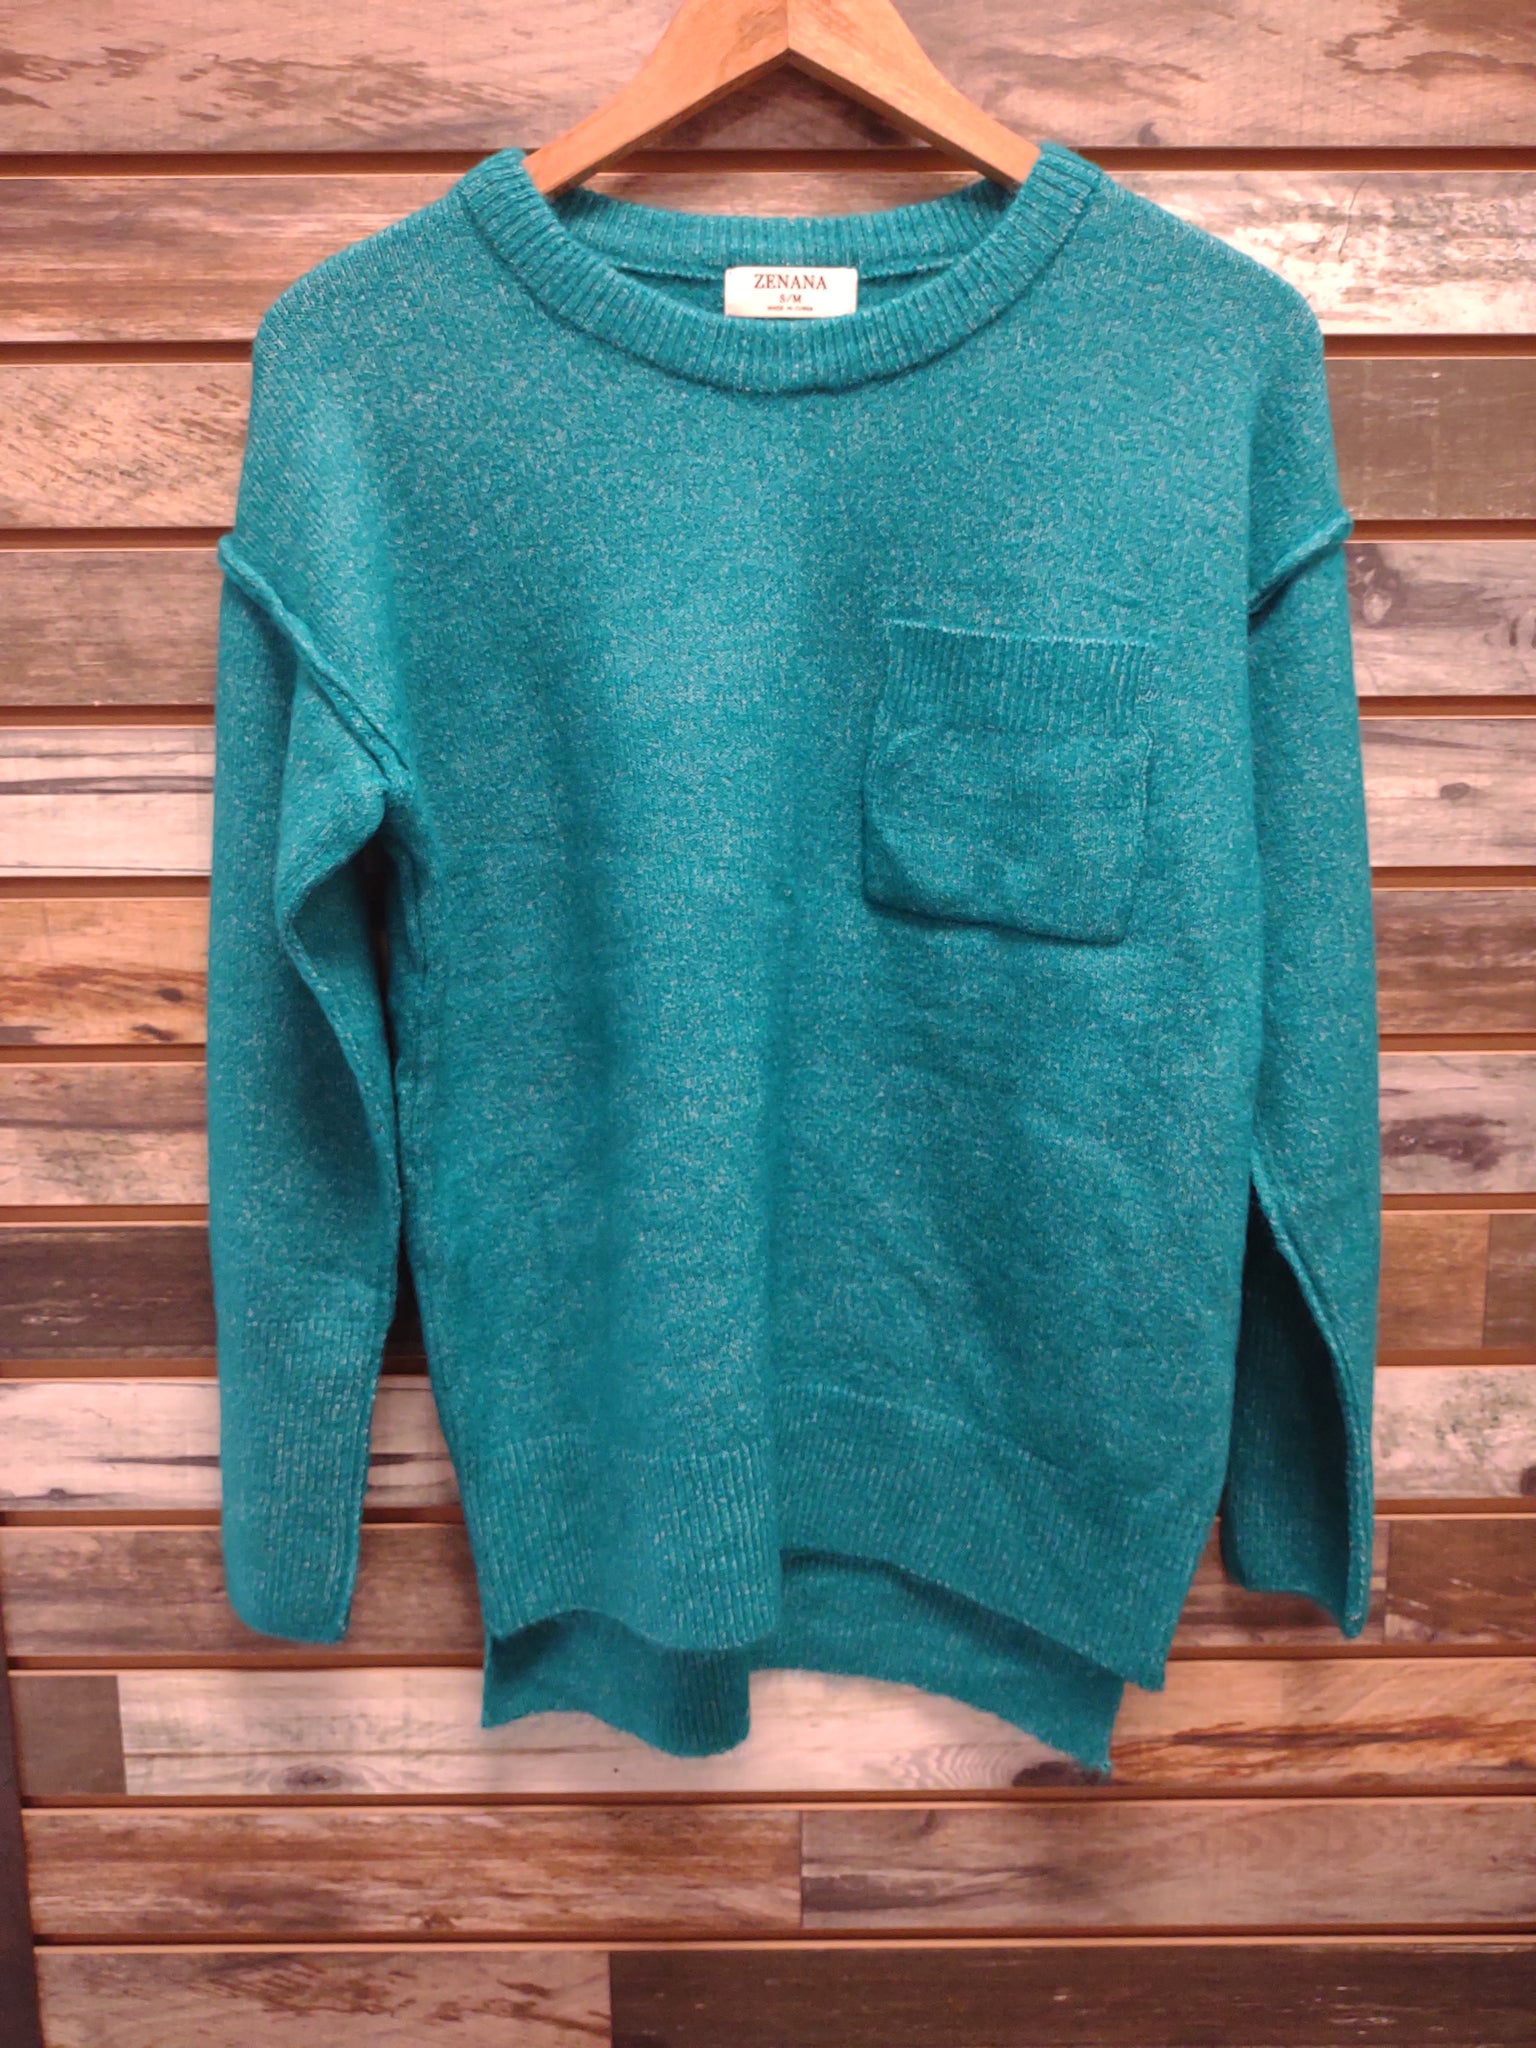 The Days There Light Teal Sweatshirt